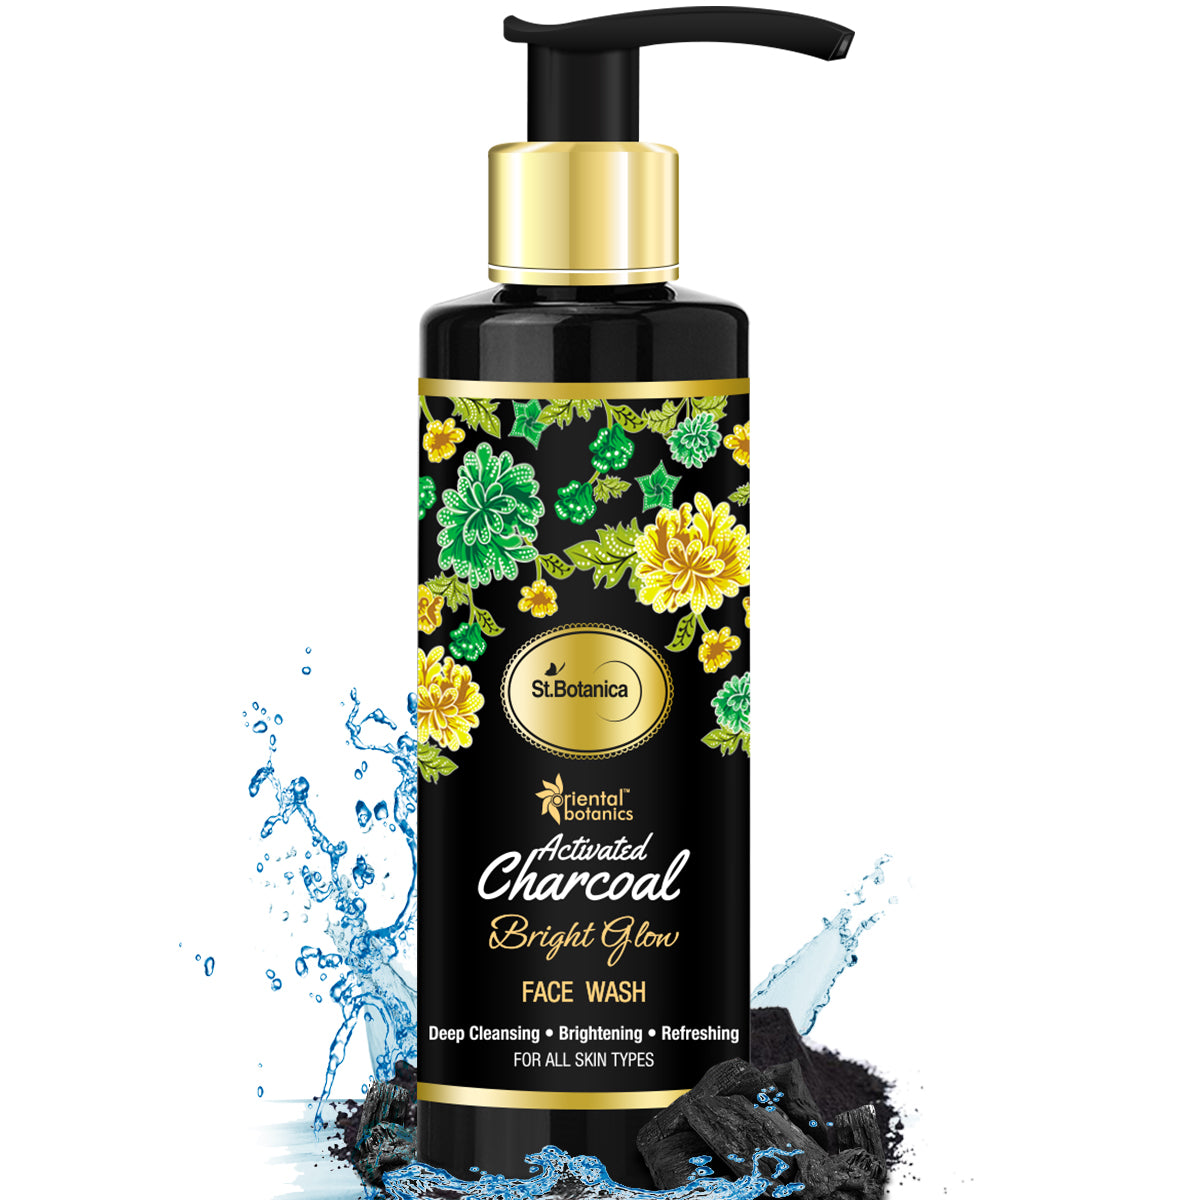 Oriental Botanics Activated Charcoal Bright Glow Face Wash - No Parabens, Sulphate, Silicones, 200ml